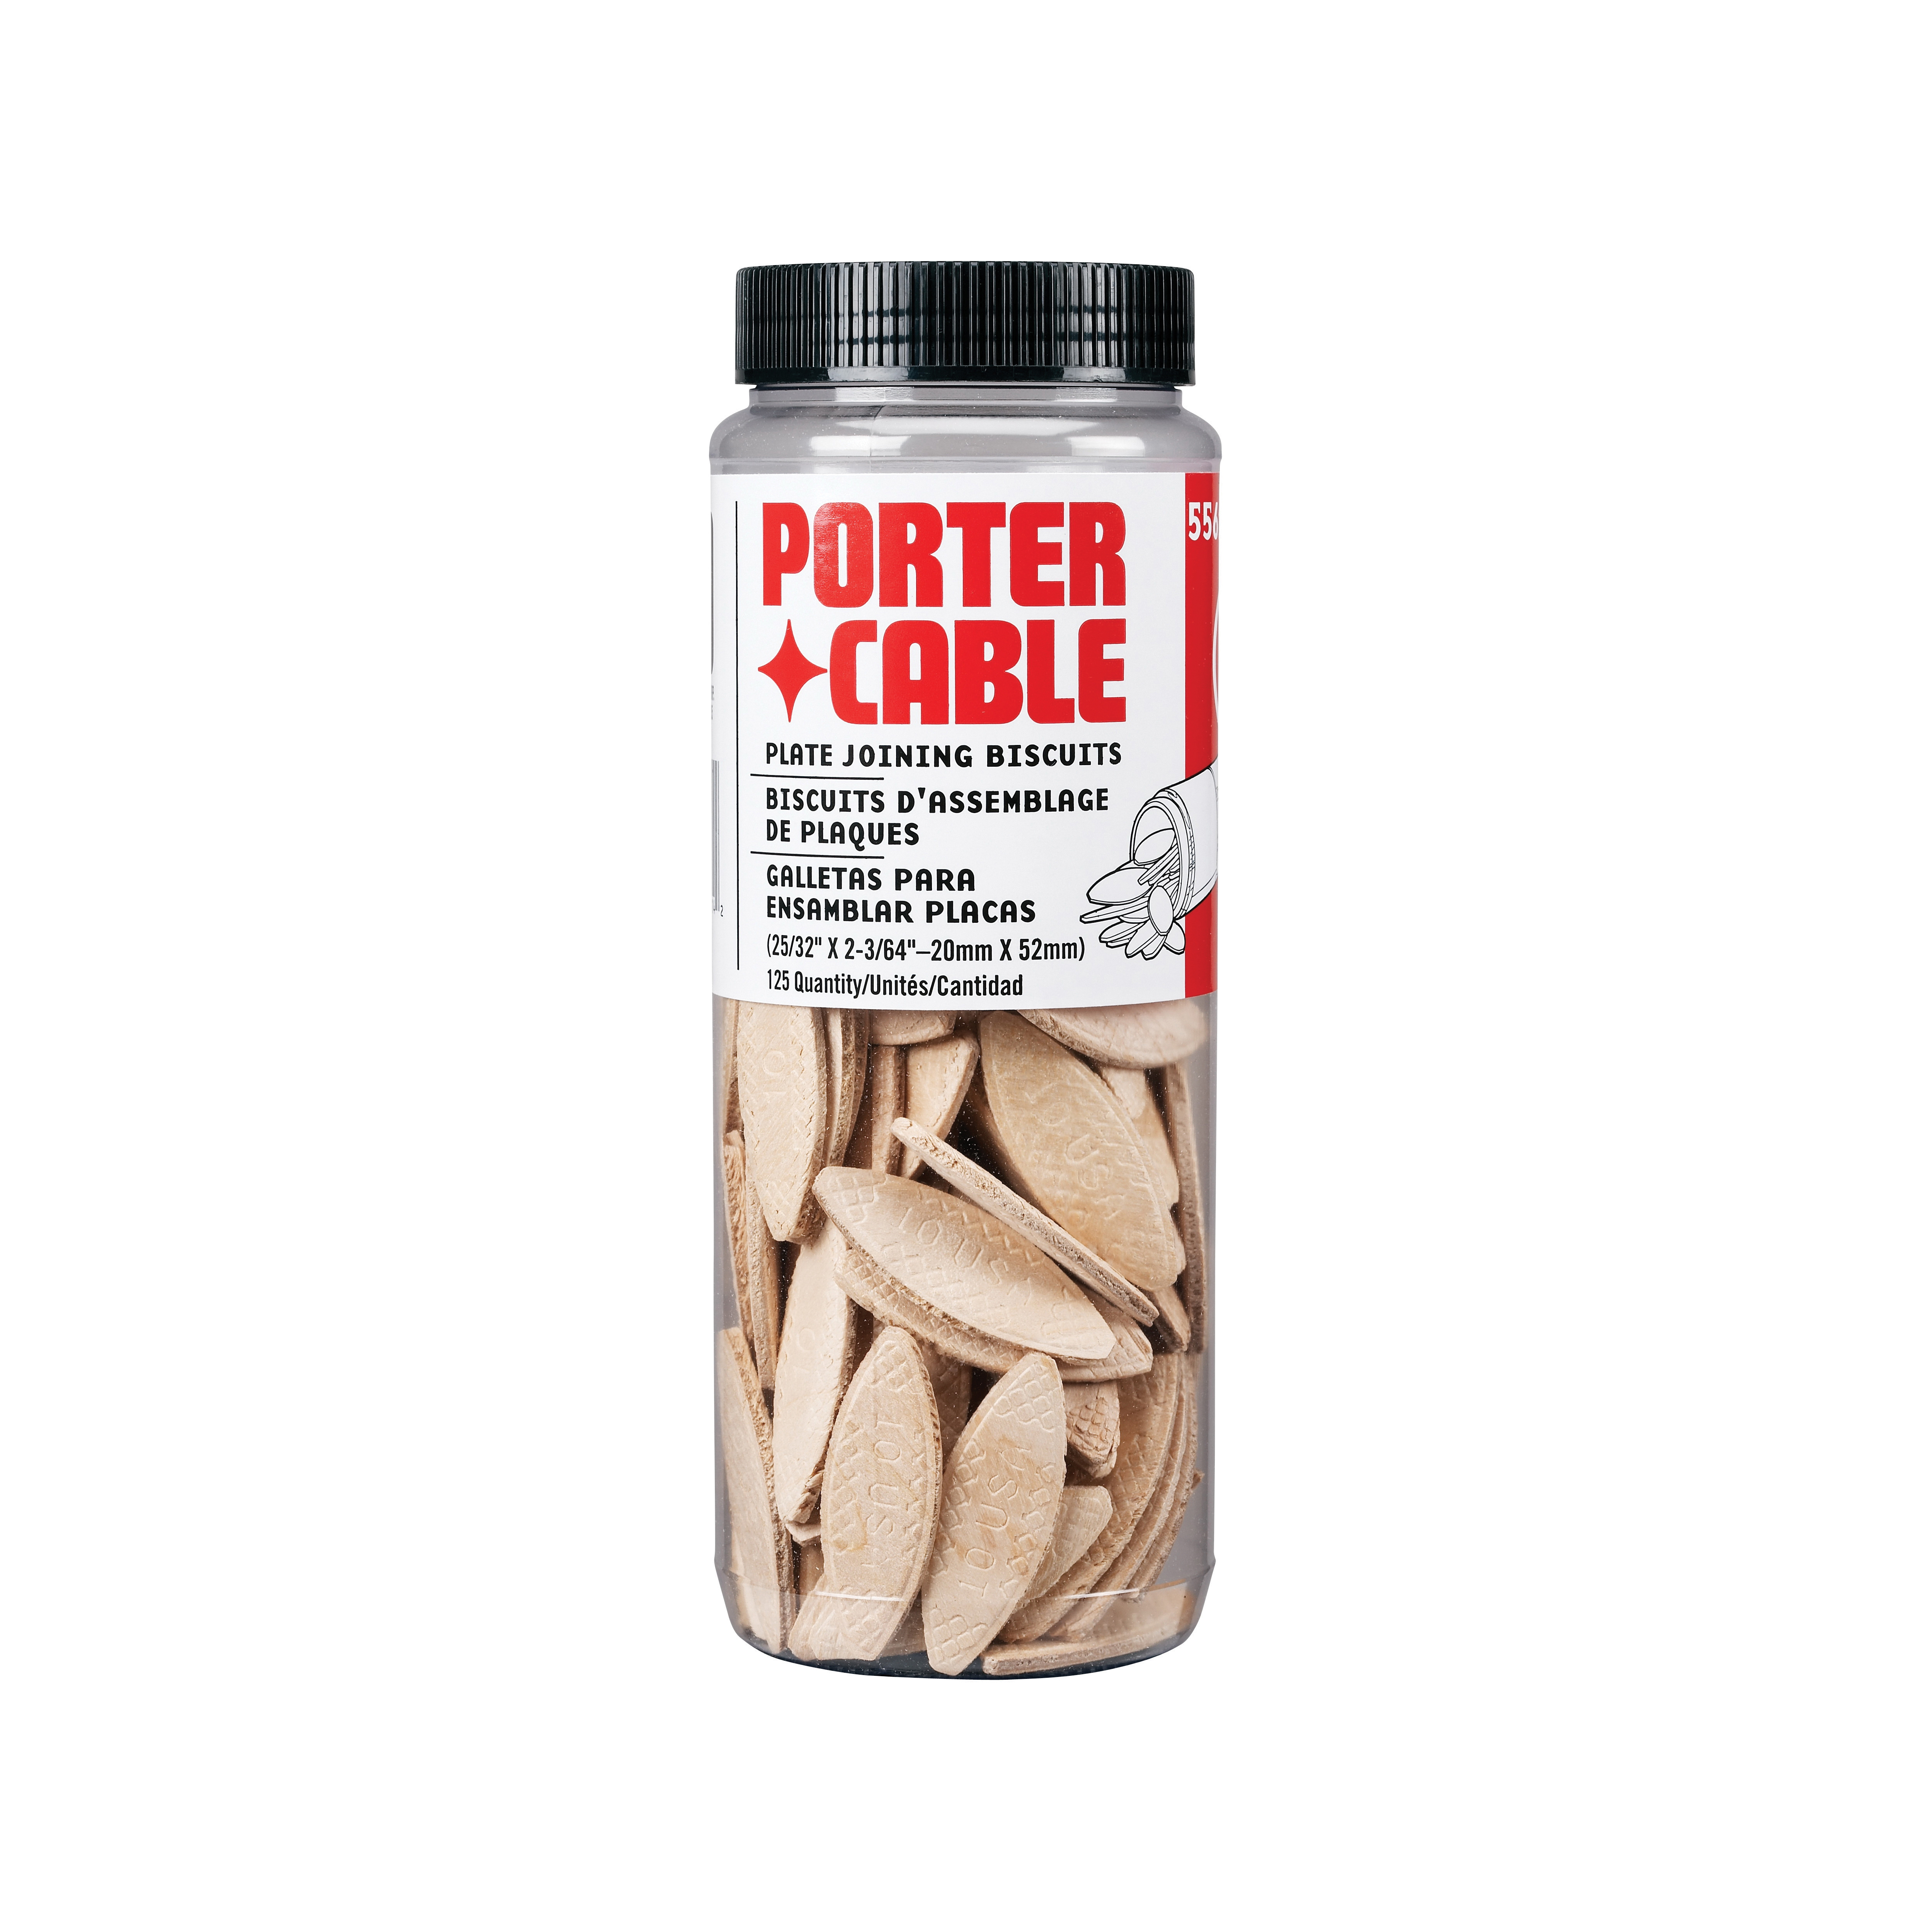 Porter_Cable_5561.jpg